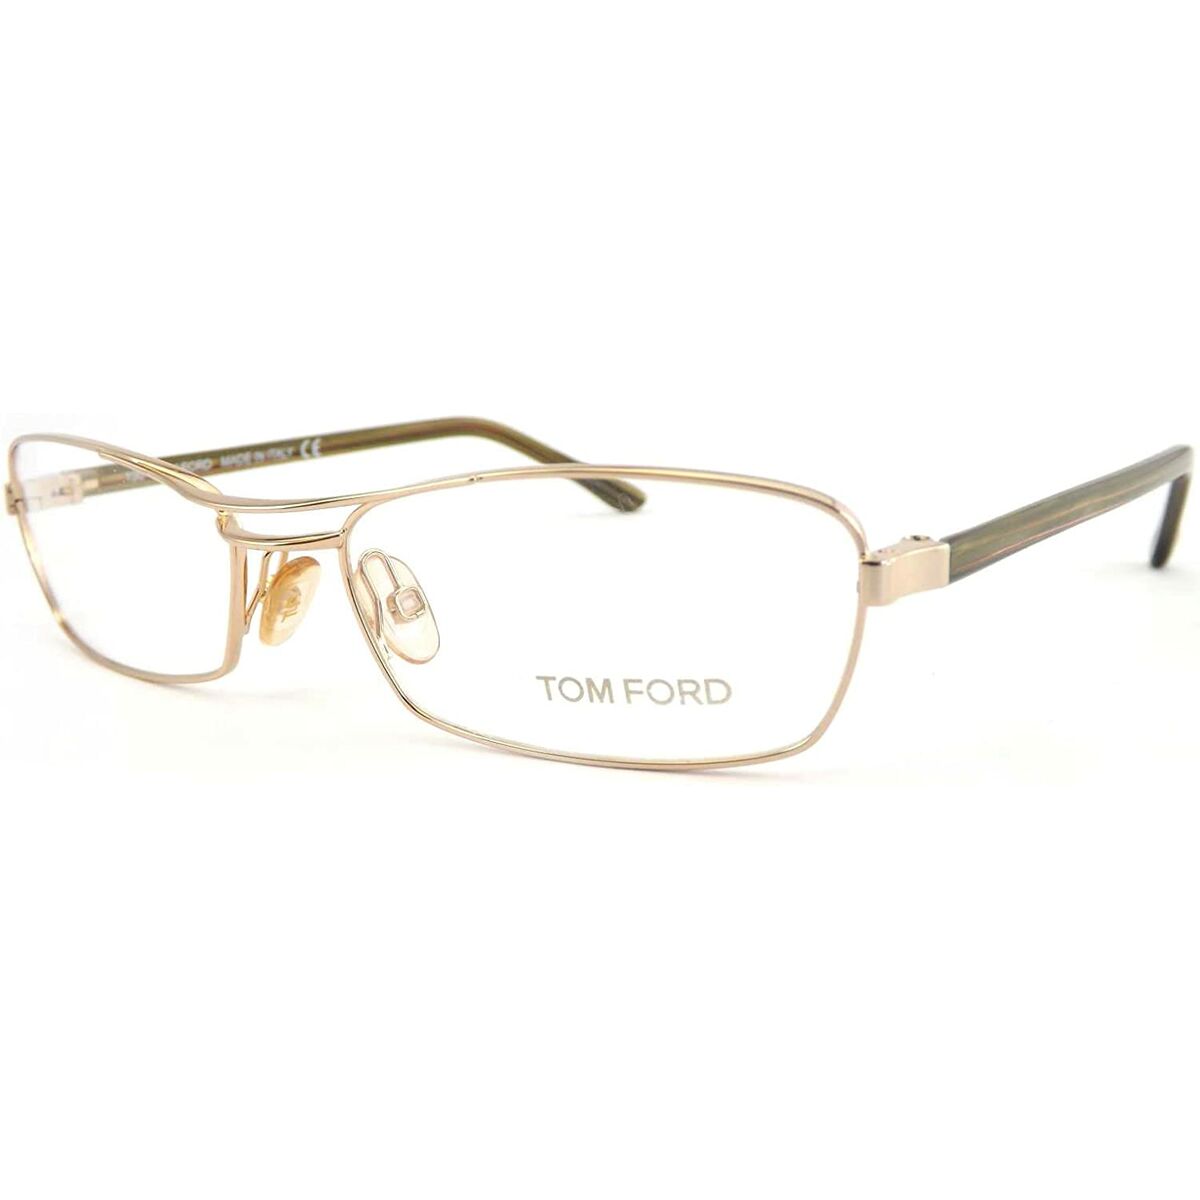 Ladies'Spectacle frame Tom Ford FT5024-255